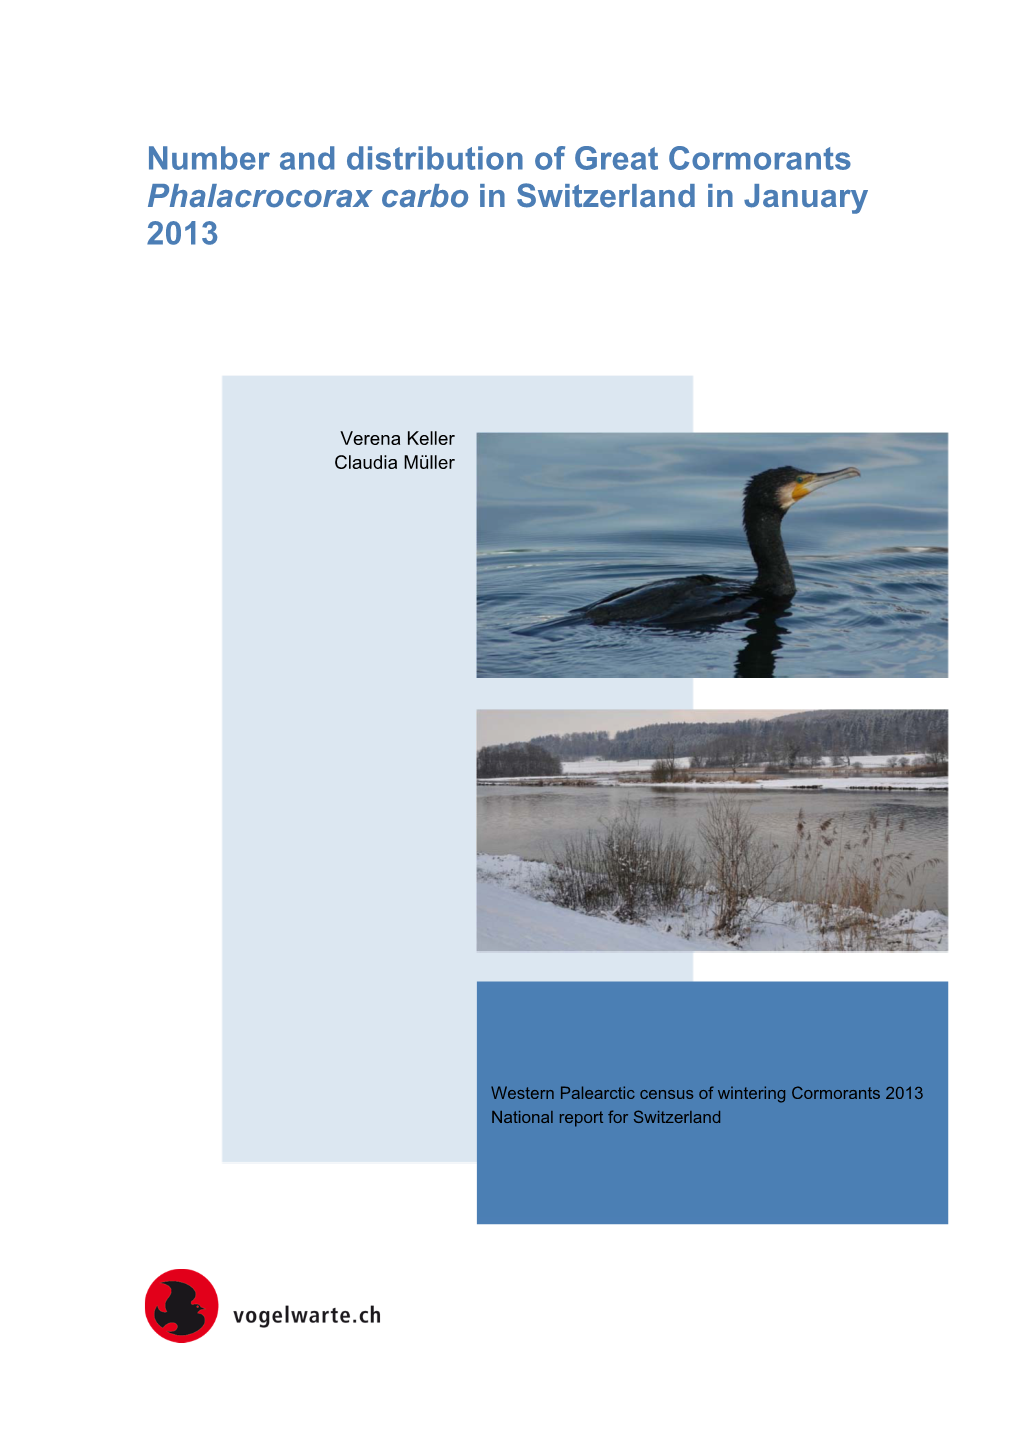 Number and Distribution of Great Cormorants Phalacrocorax Carbo in Switzerland in January 2013